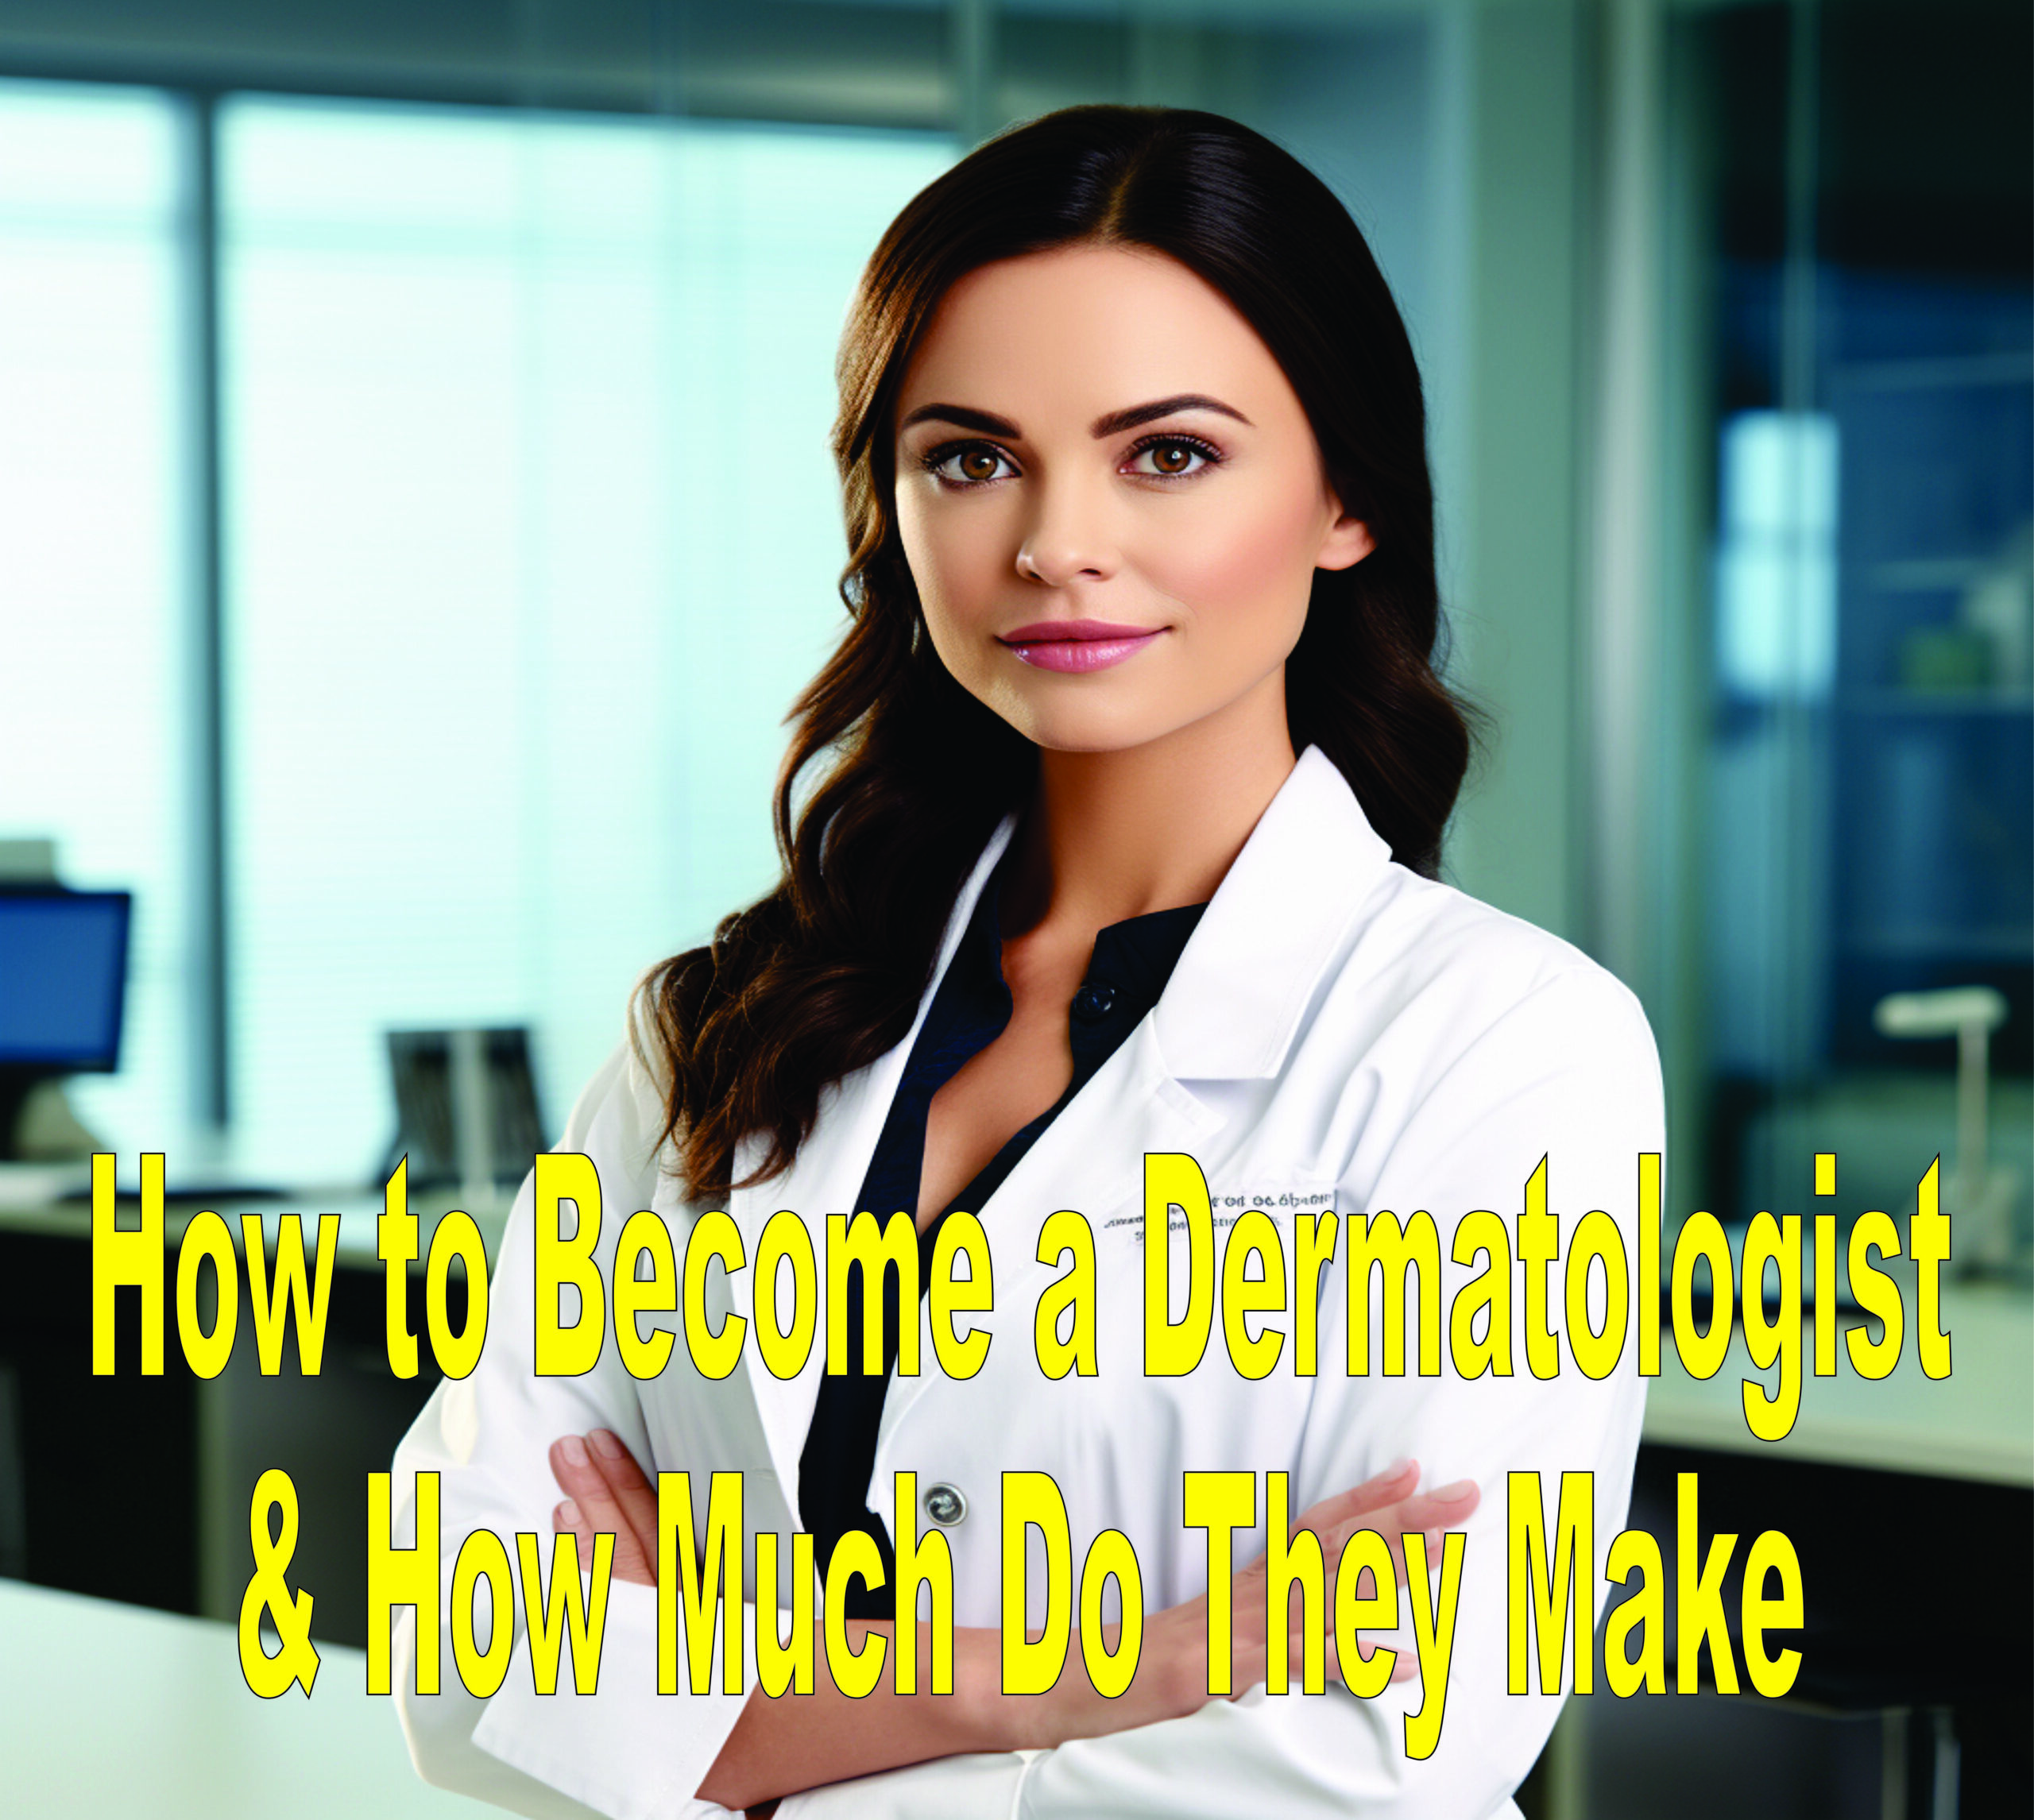 How To Become A Dermatologist & How Much Do They Make